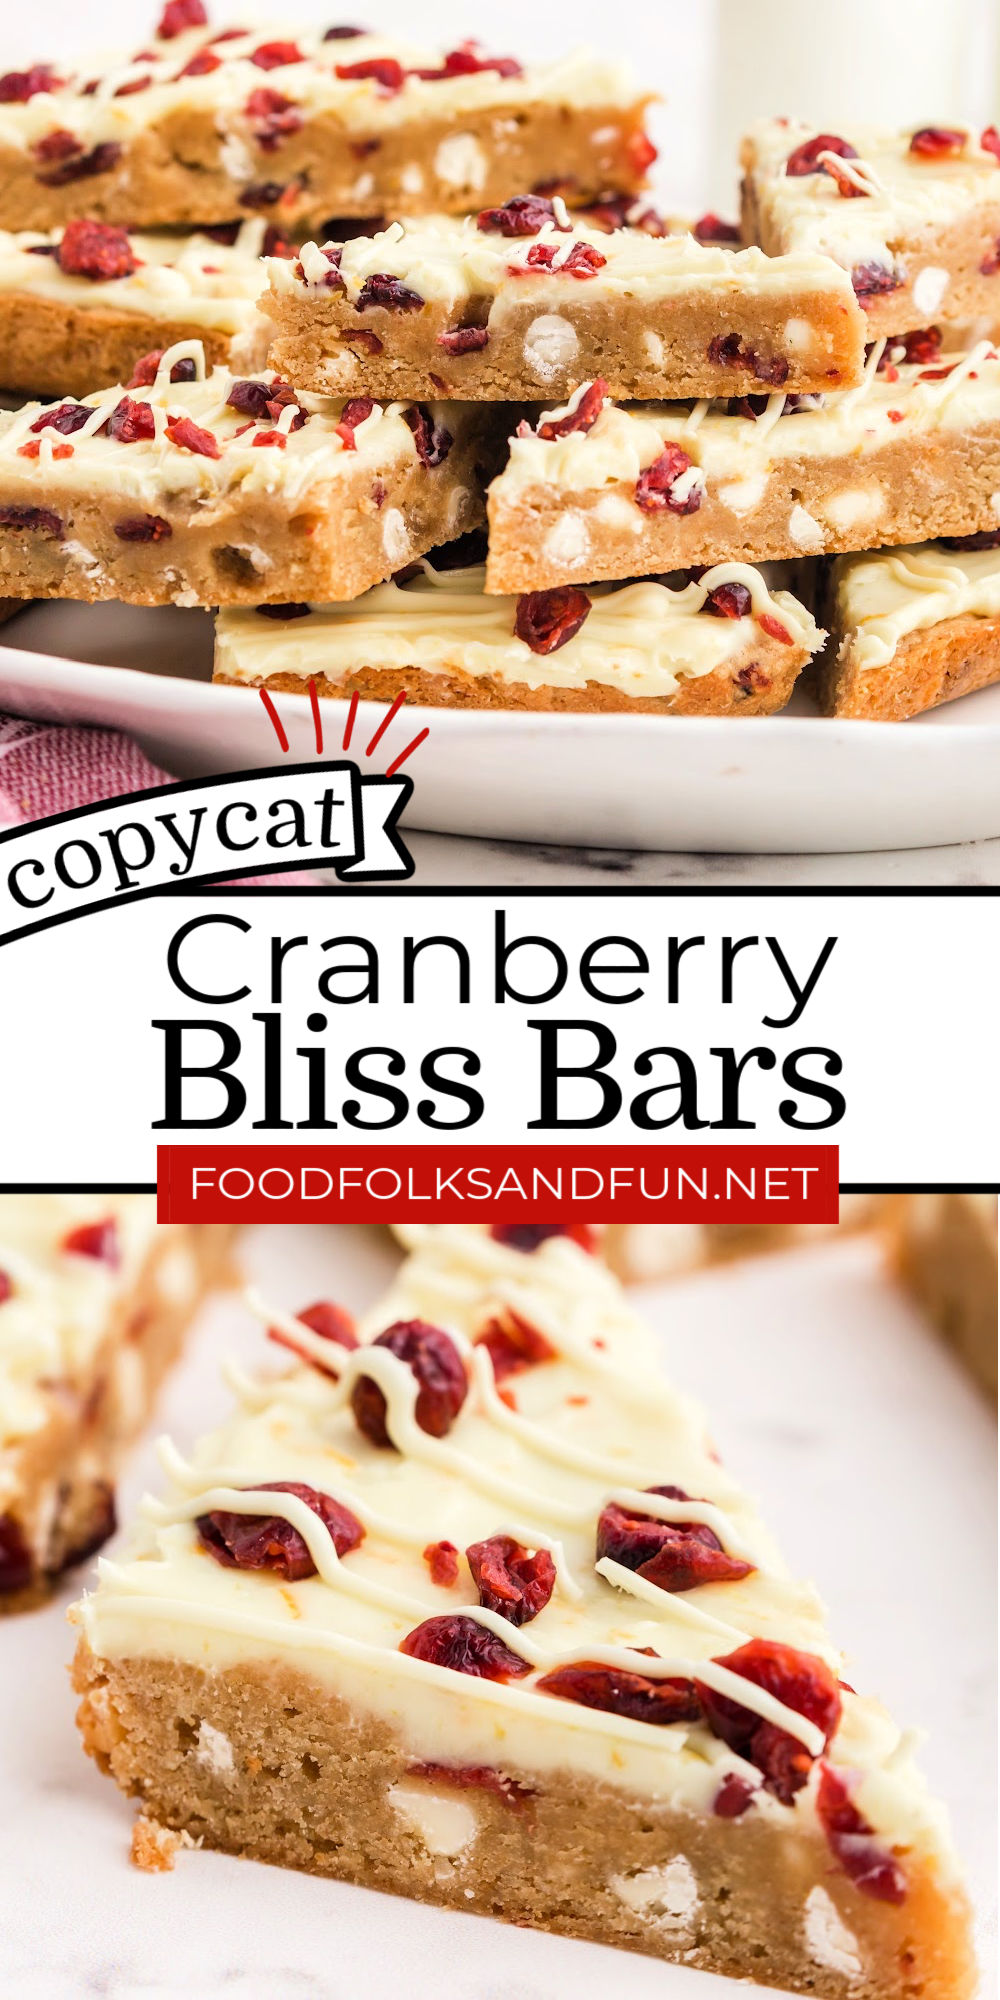 These Cranberry Bliss Bars are perfect for the holidays. They're quick and easy to make and taste, just like Starbucks! via @foodfolksandfun